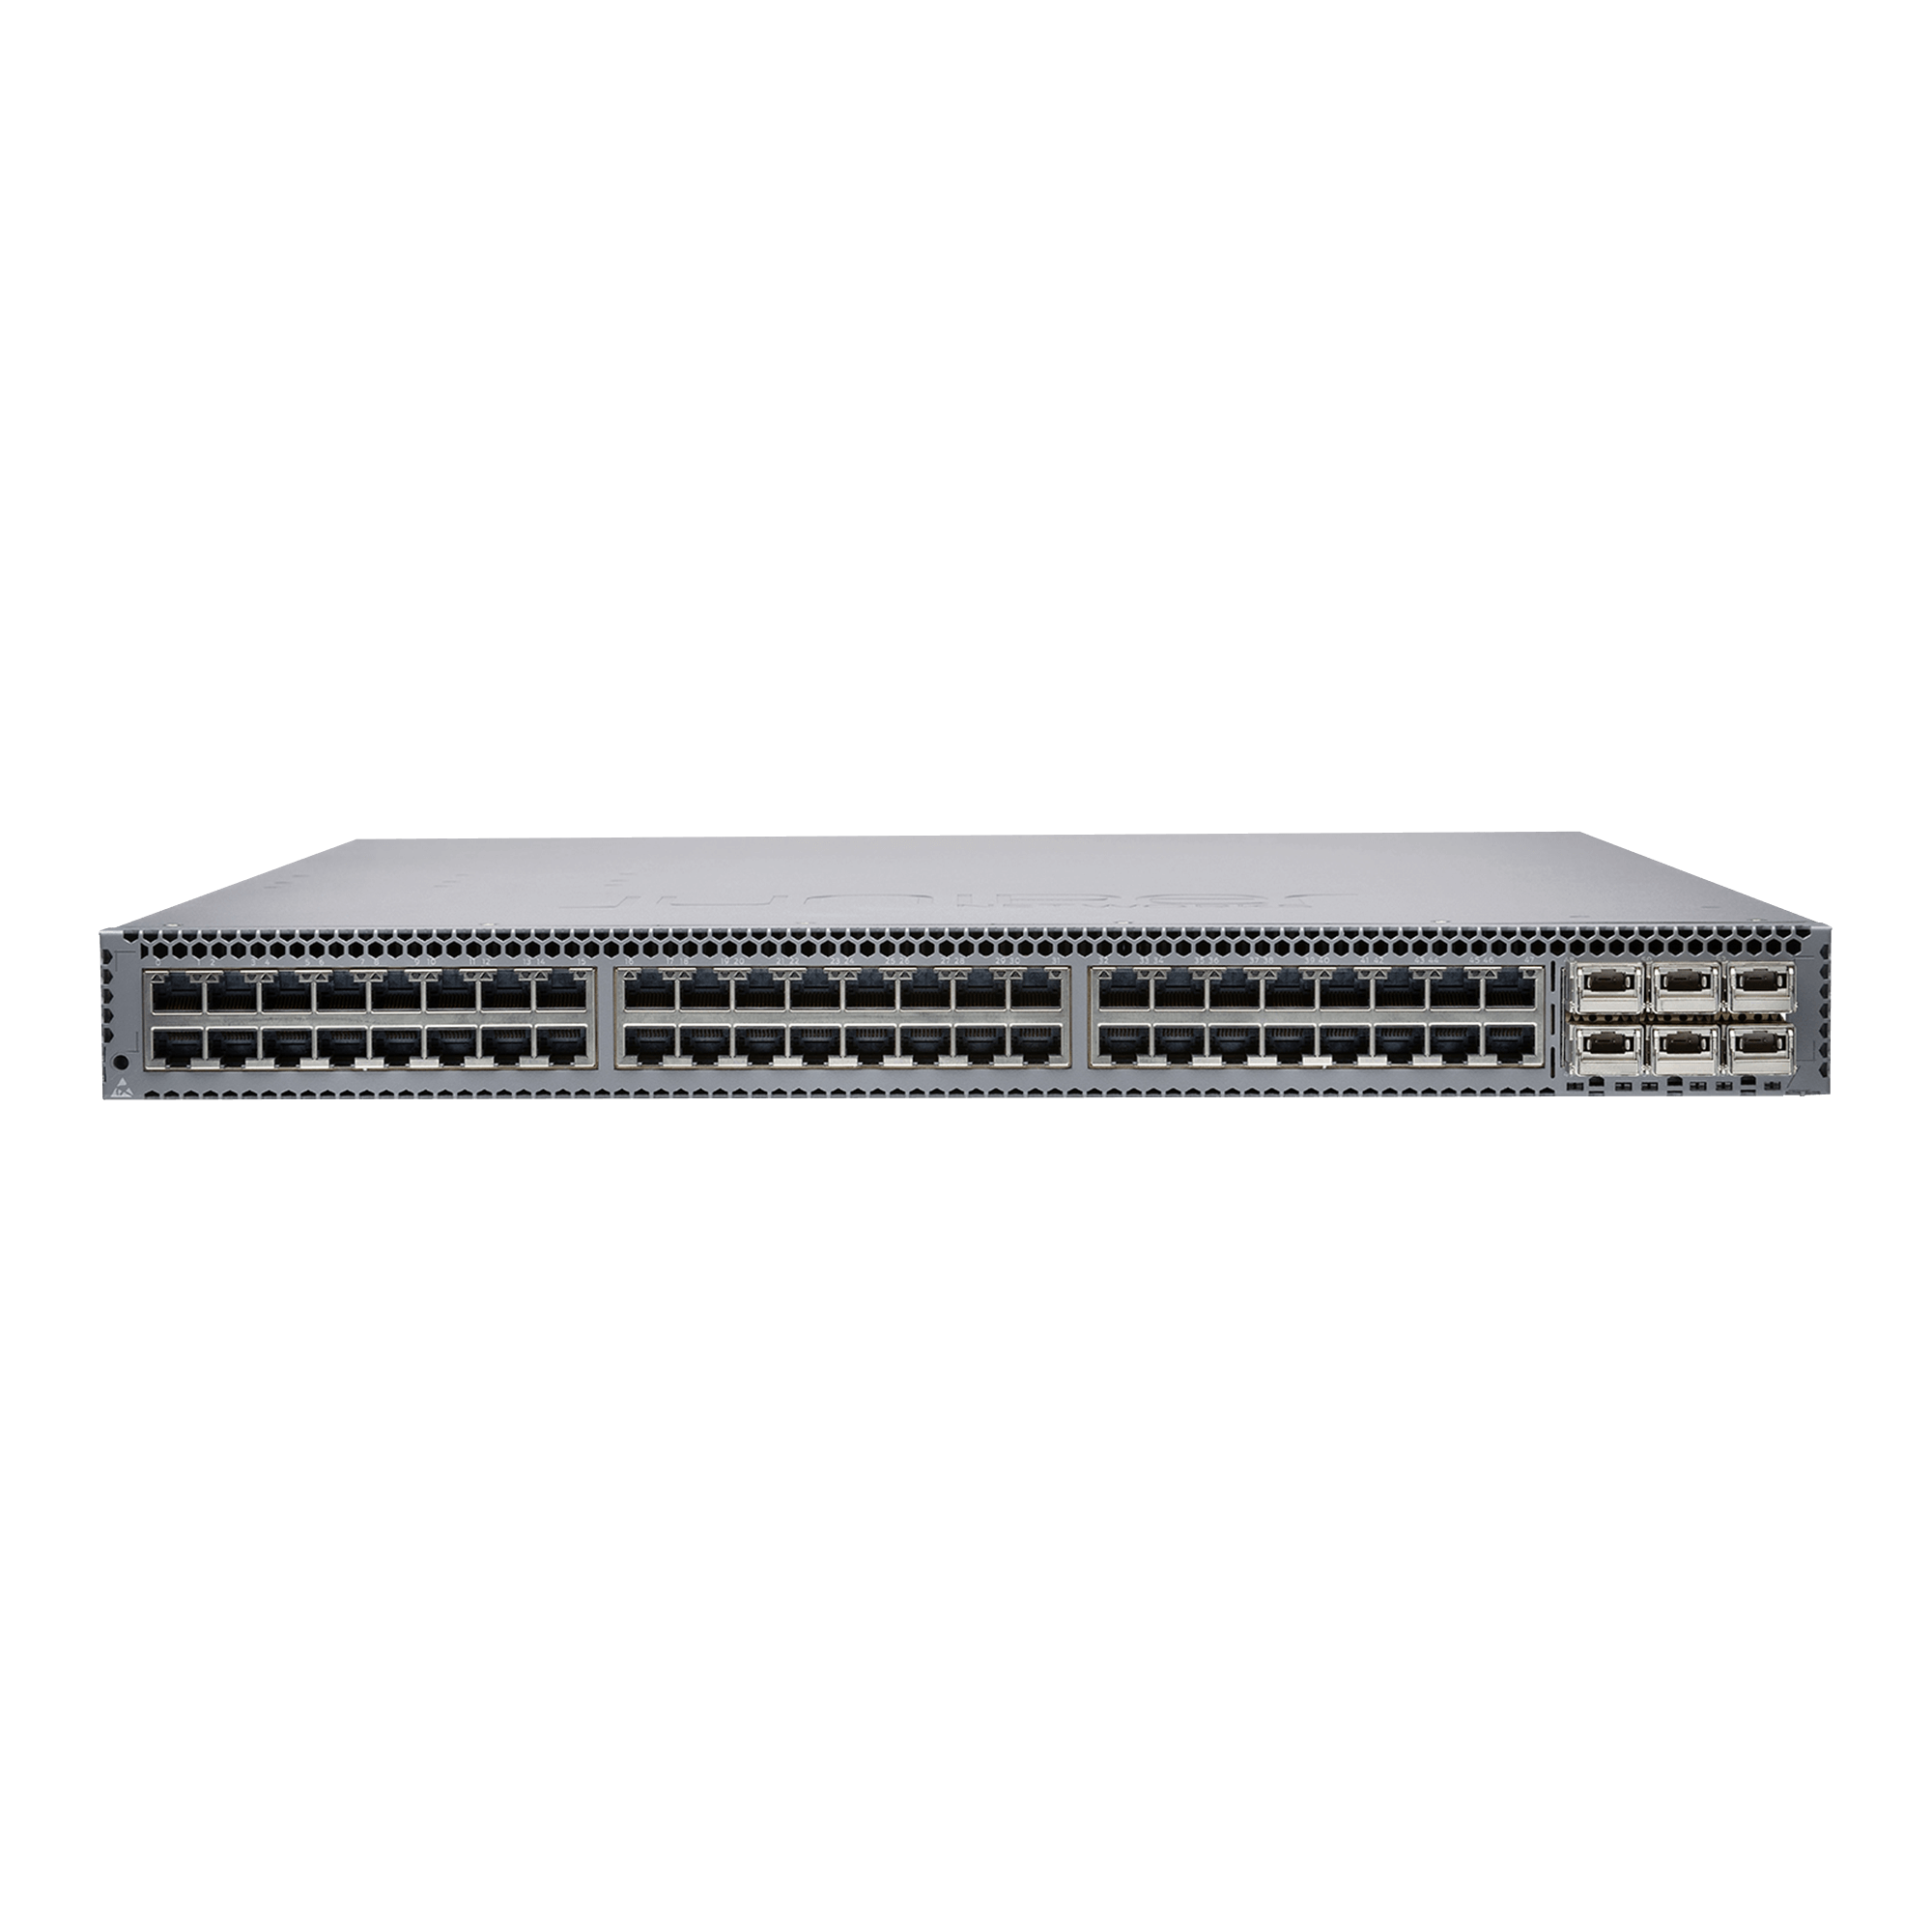 Juniper QFX5100-48S-AFO 48xSFP+ 10G Managed Switch